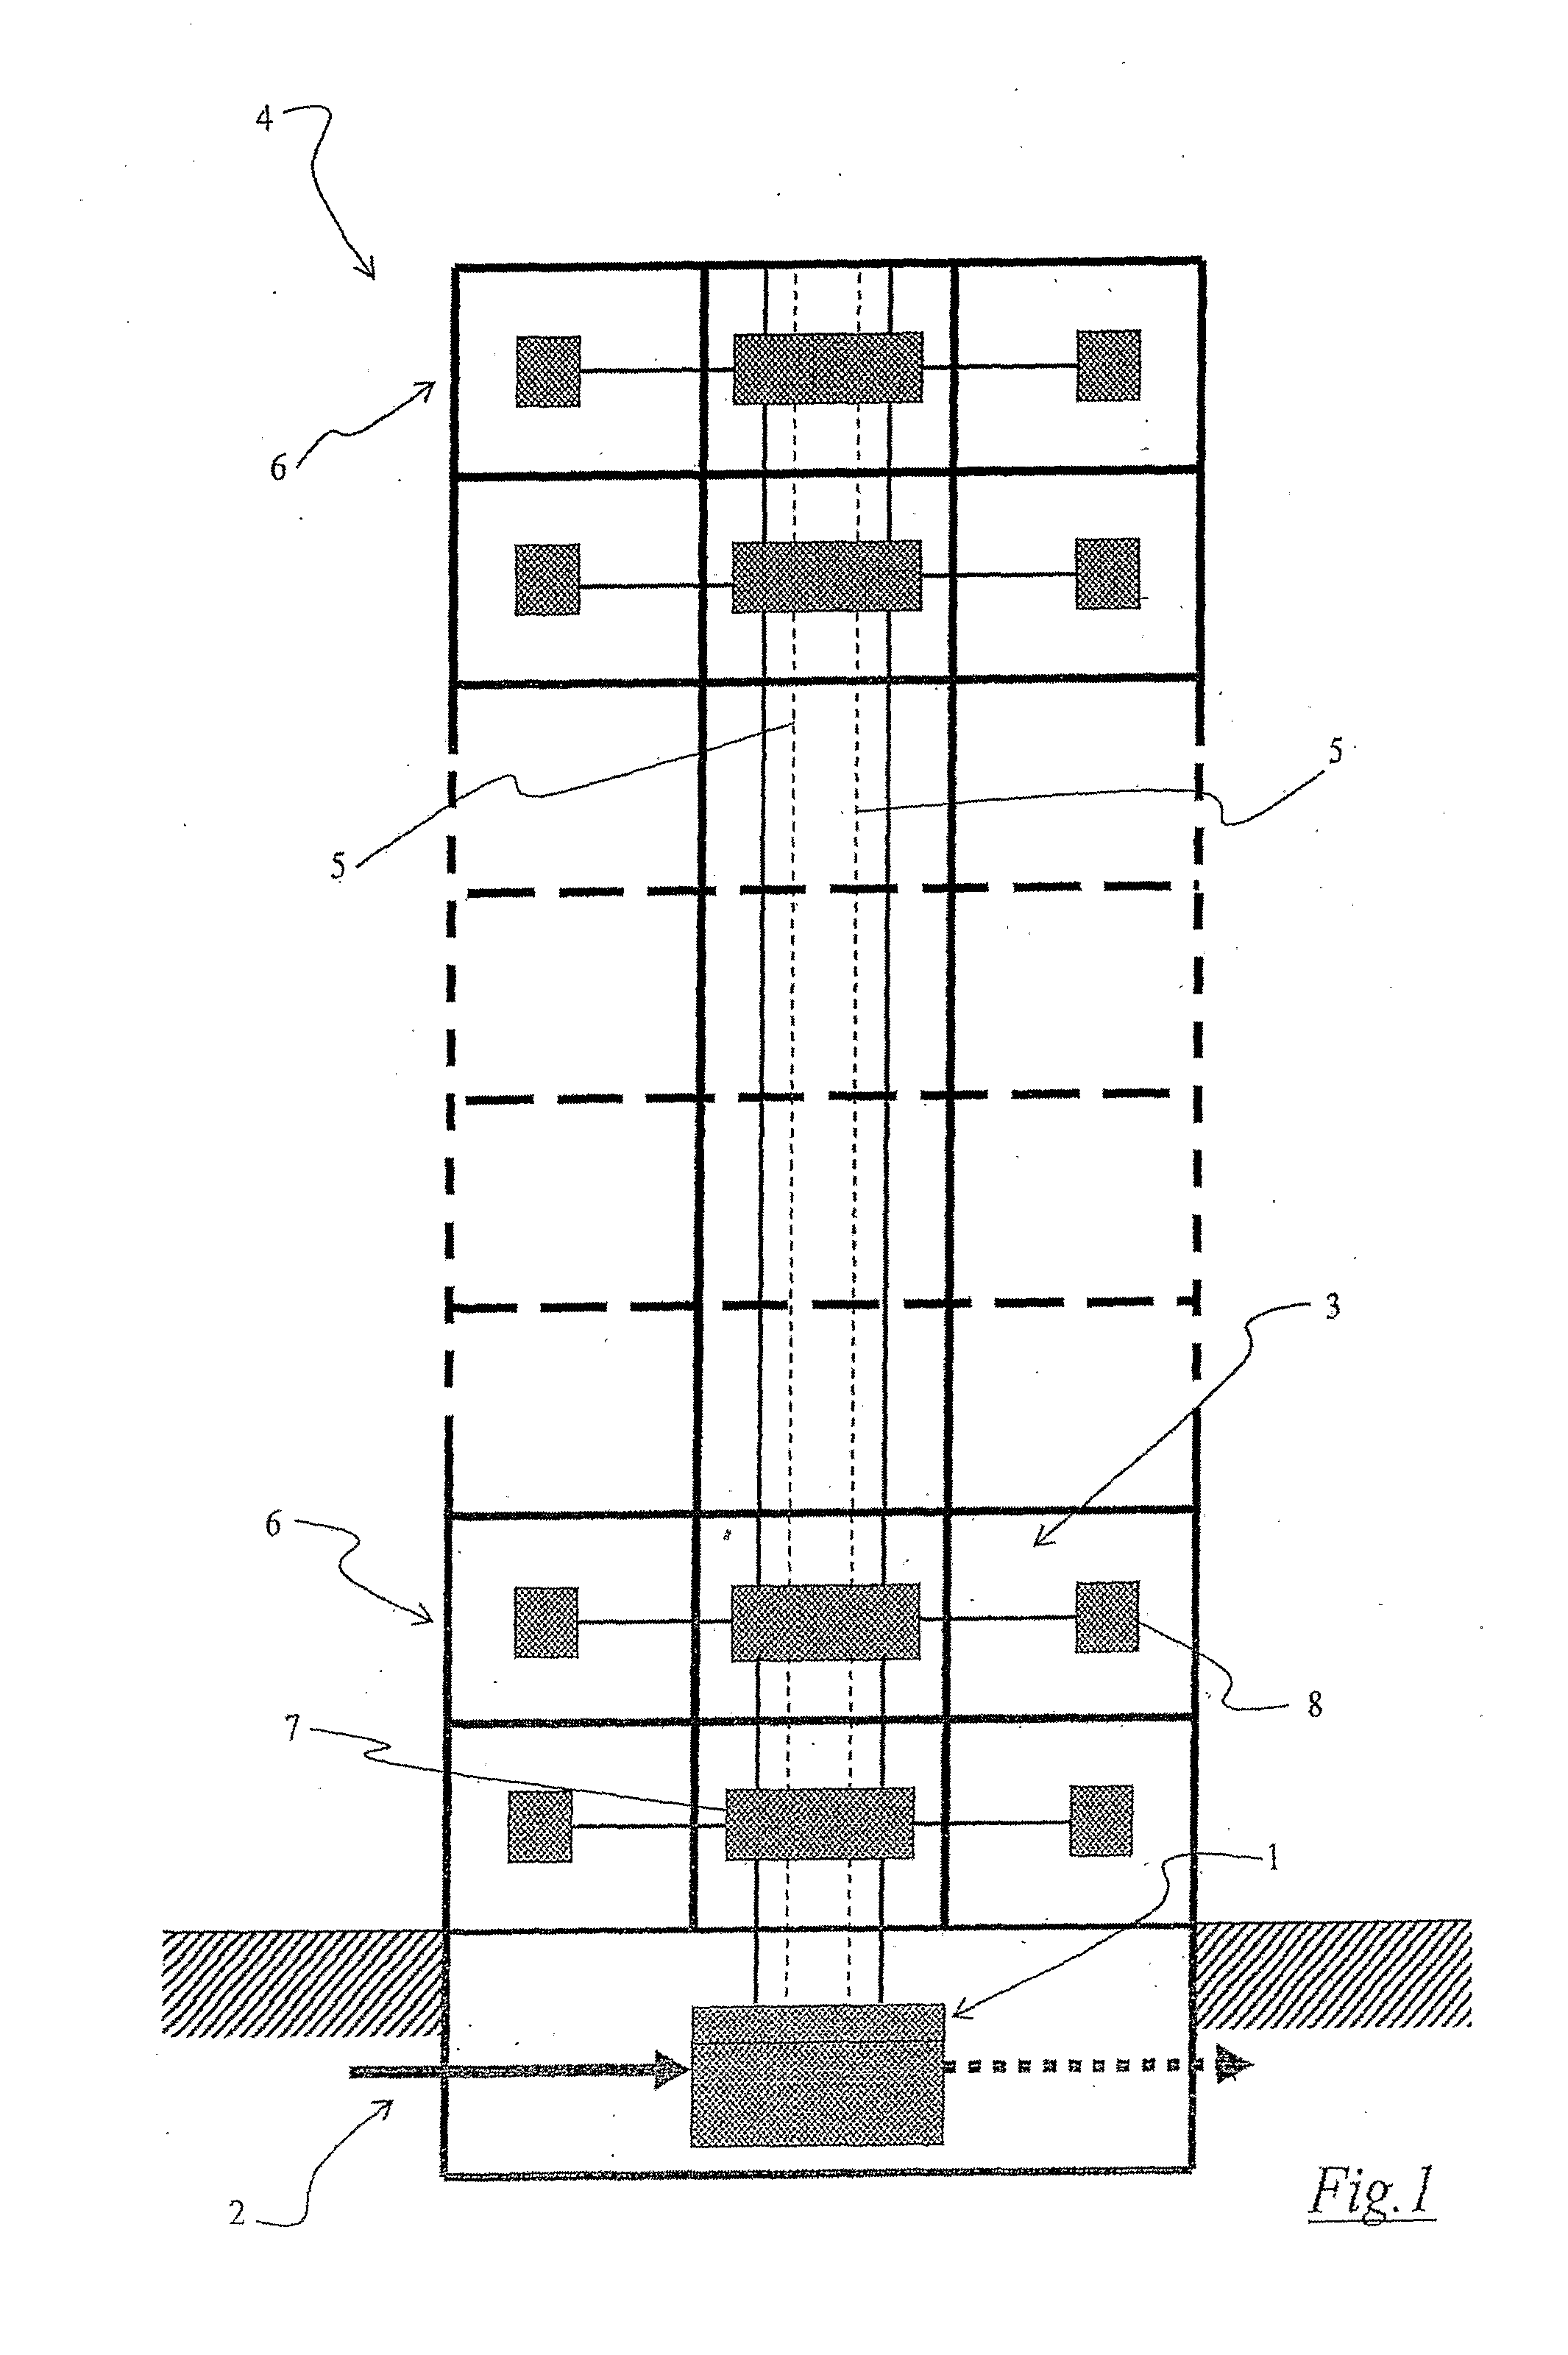 Modular system and methods for connecting an external communication network to a user network of a building